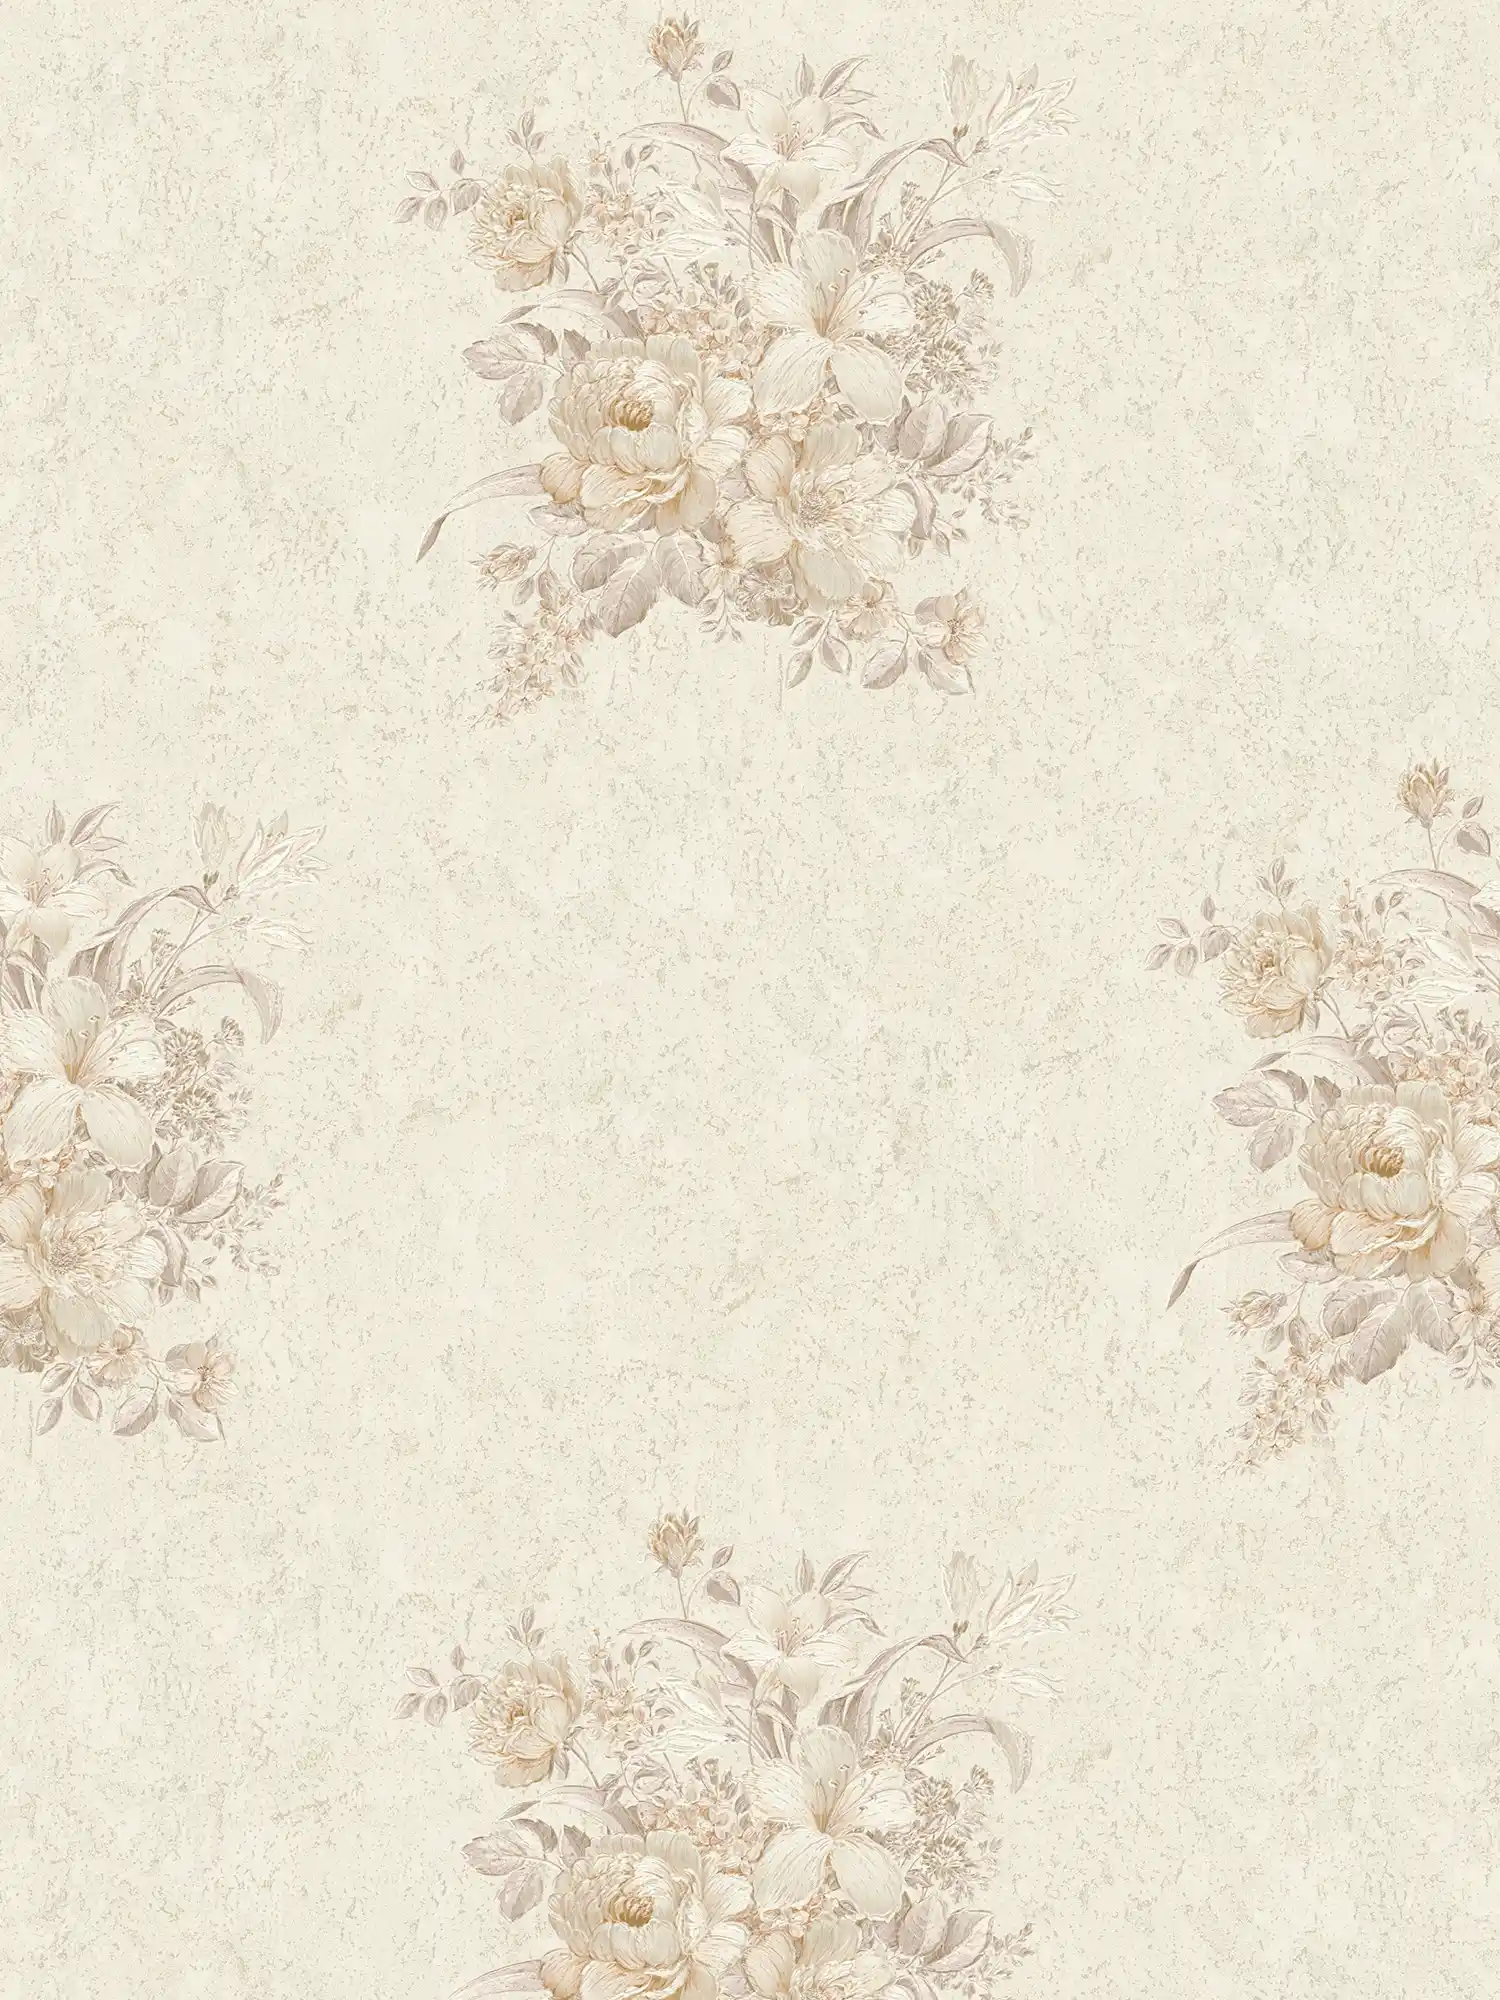 Flowers wallpaper with ornaments, textured - beige, cream
